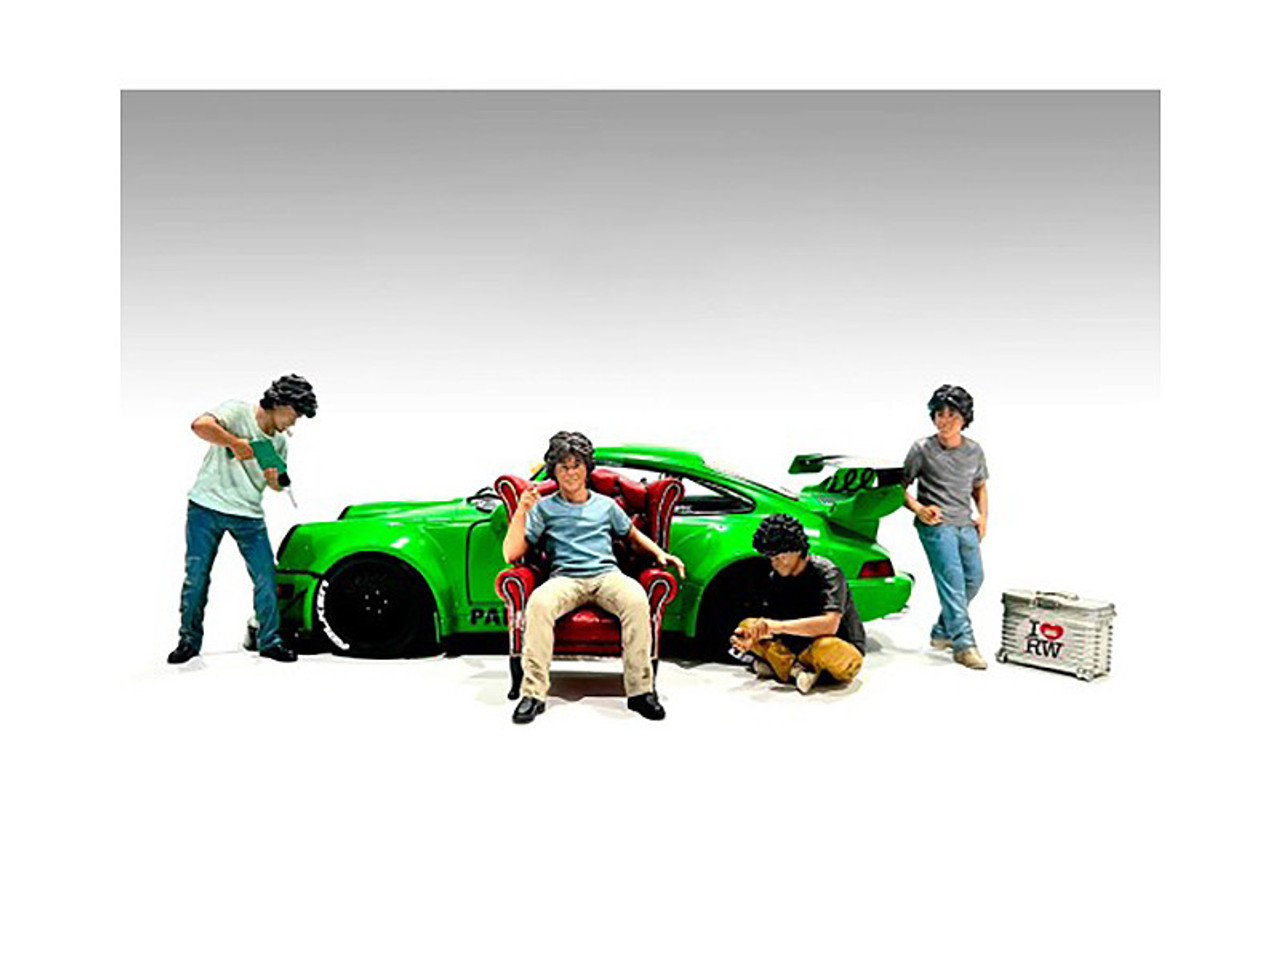 "RWB Legend Akira Nakai" 6 piece Figures and Accessories for 1/18 Scale Models by American Diorama